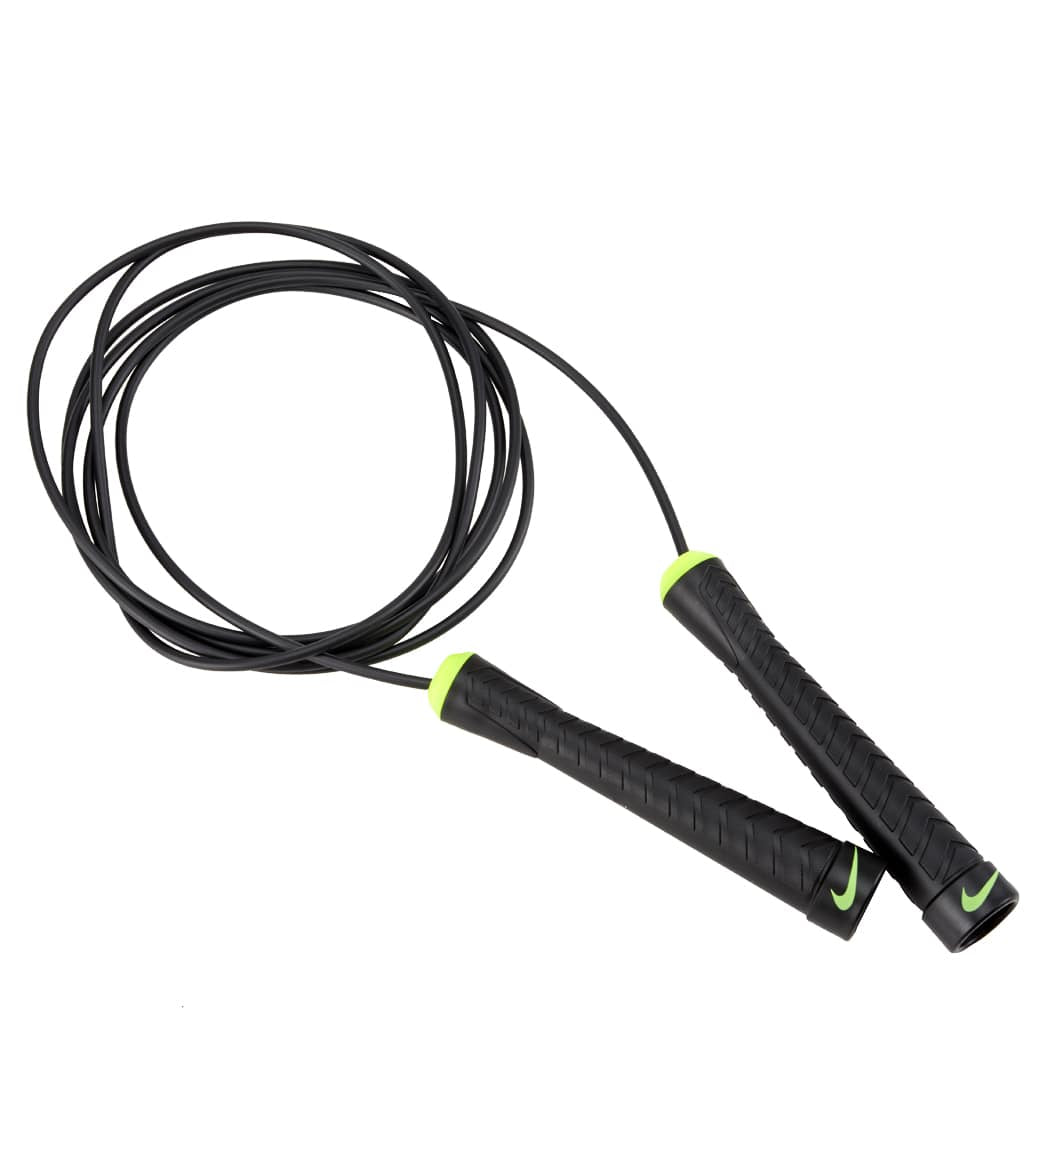 Sabueso Deseo Personas mayores Nike Fundamental Speed Rope at SwimOutlet.com